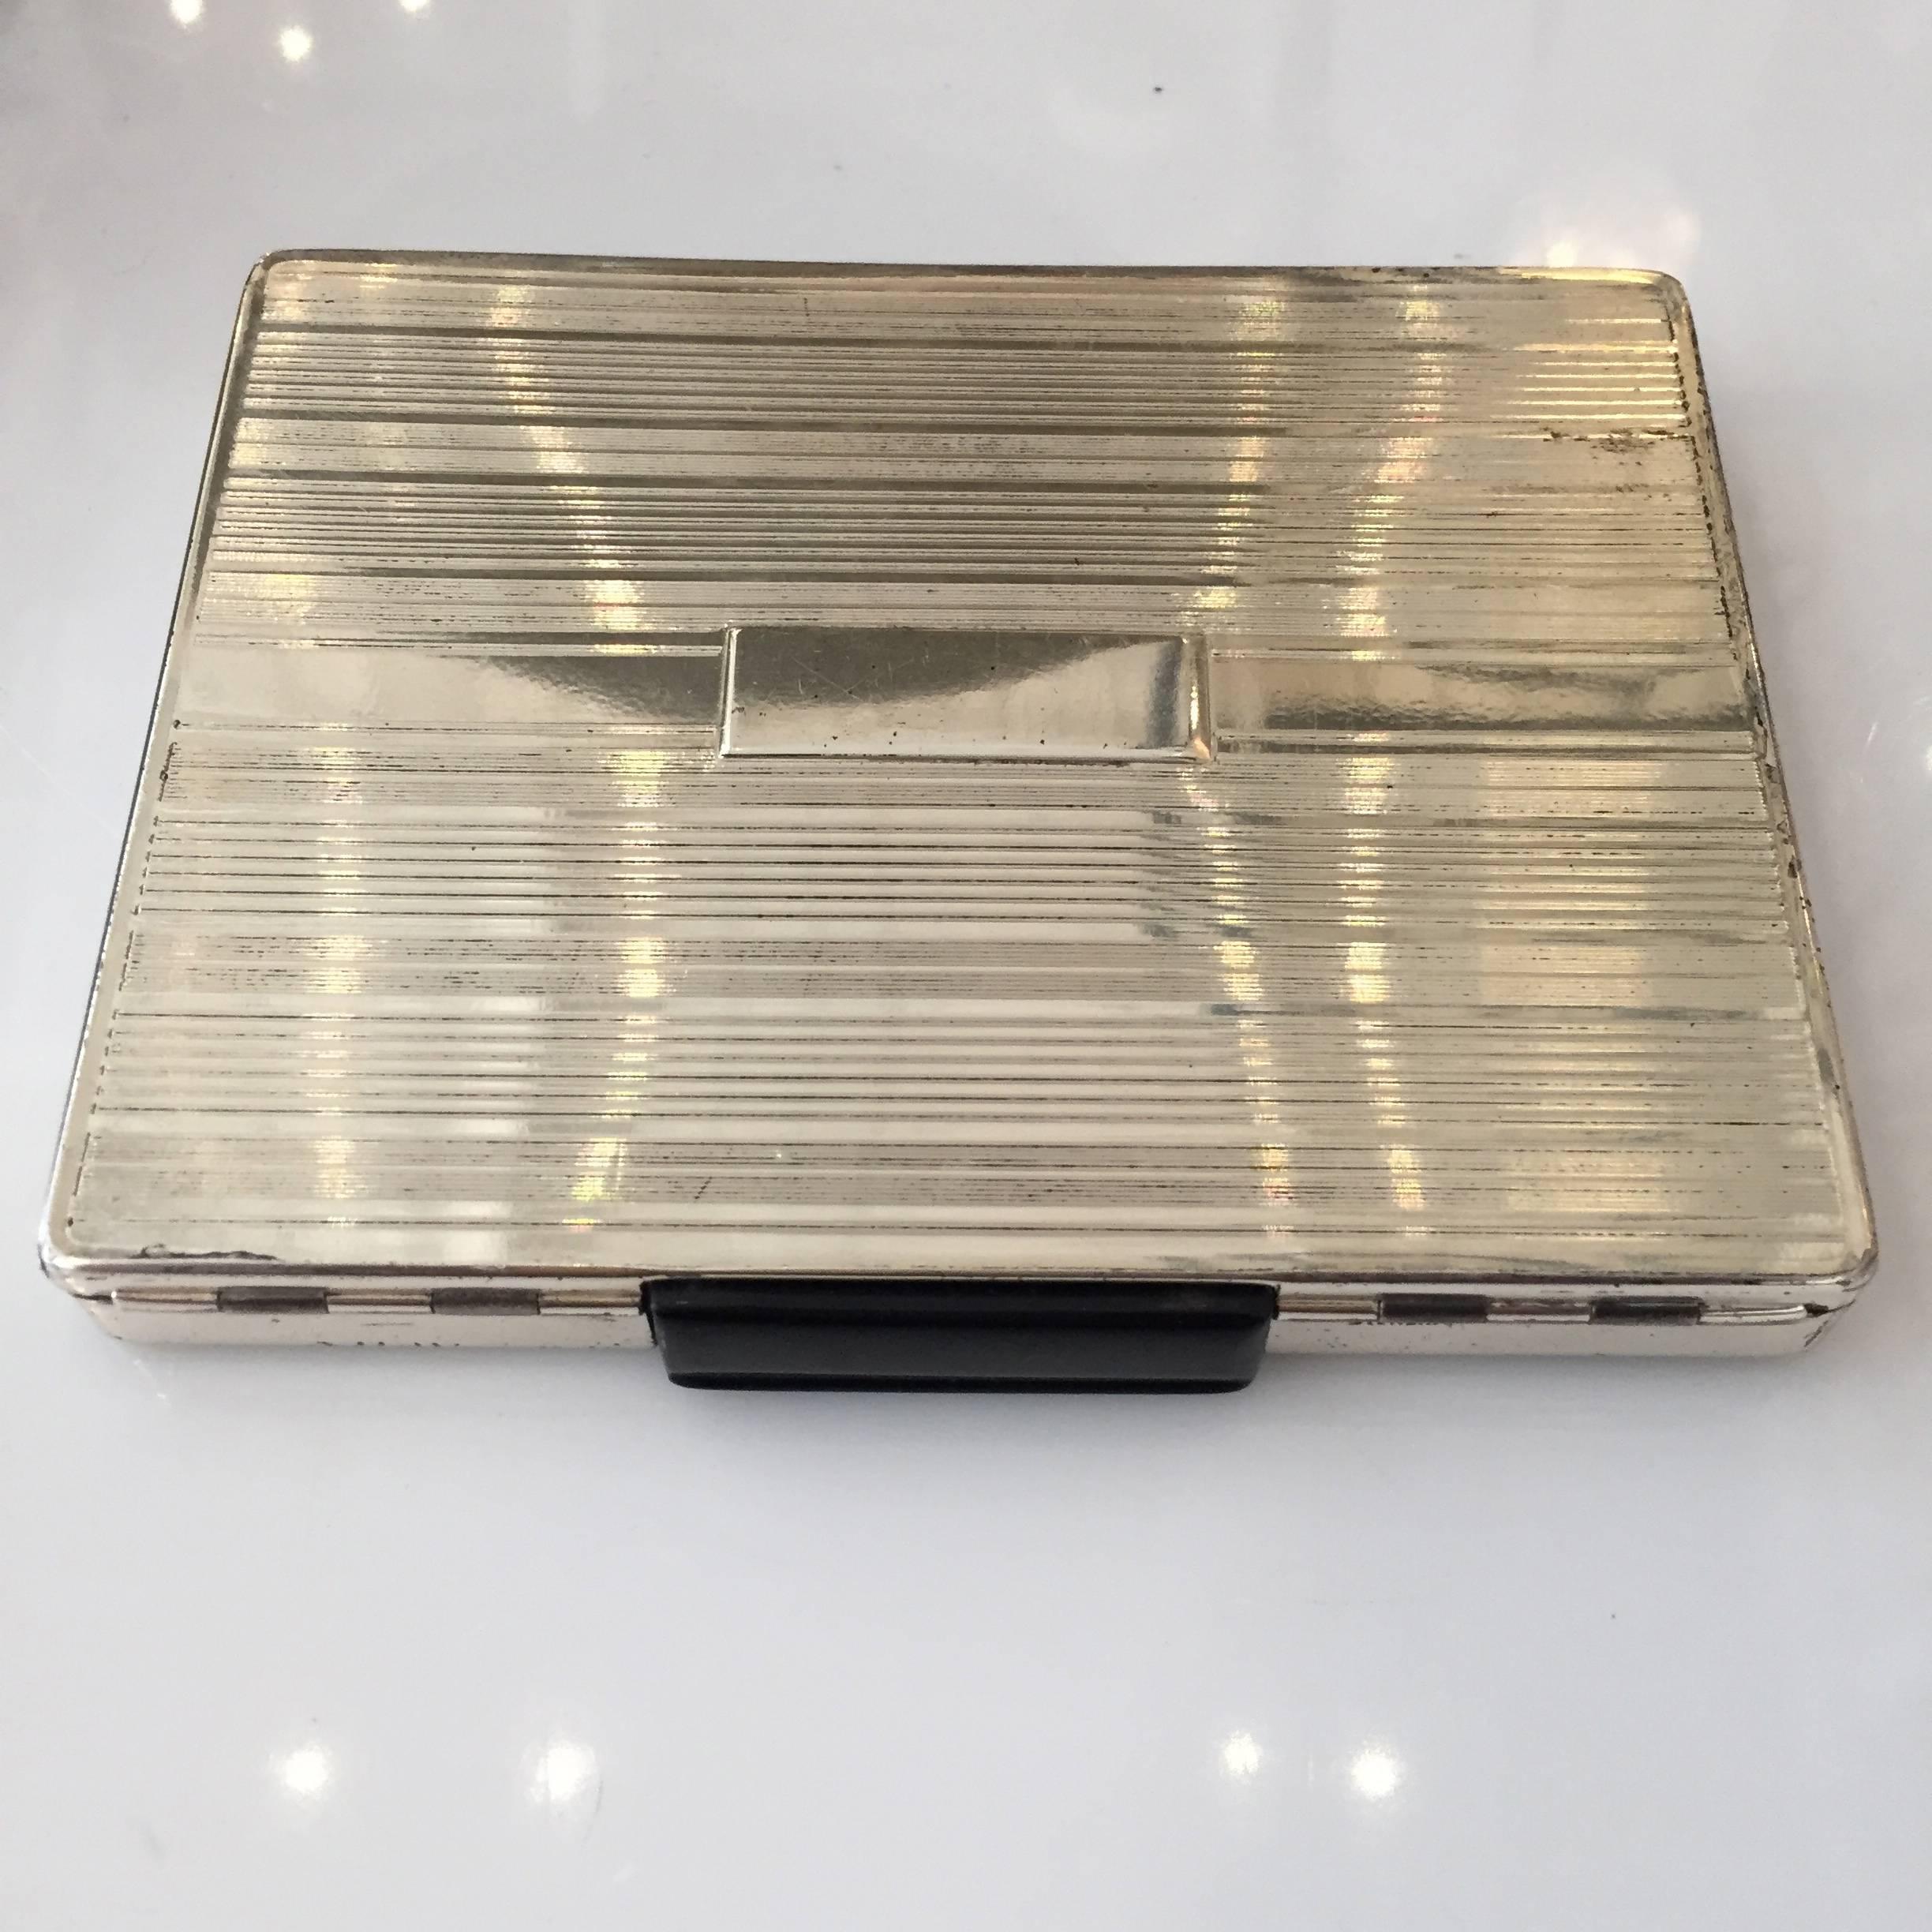 Streamlined sterling silver cigarette case with dispenser, push the black button and a cigarette pops out at you!

Excellent working vintage condition.

Measure: 3 1/4